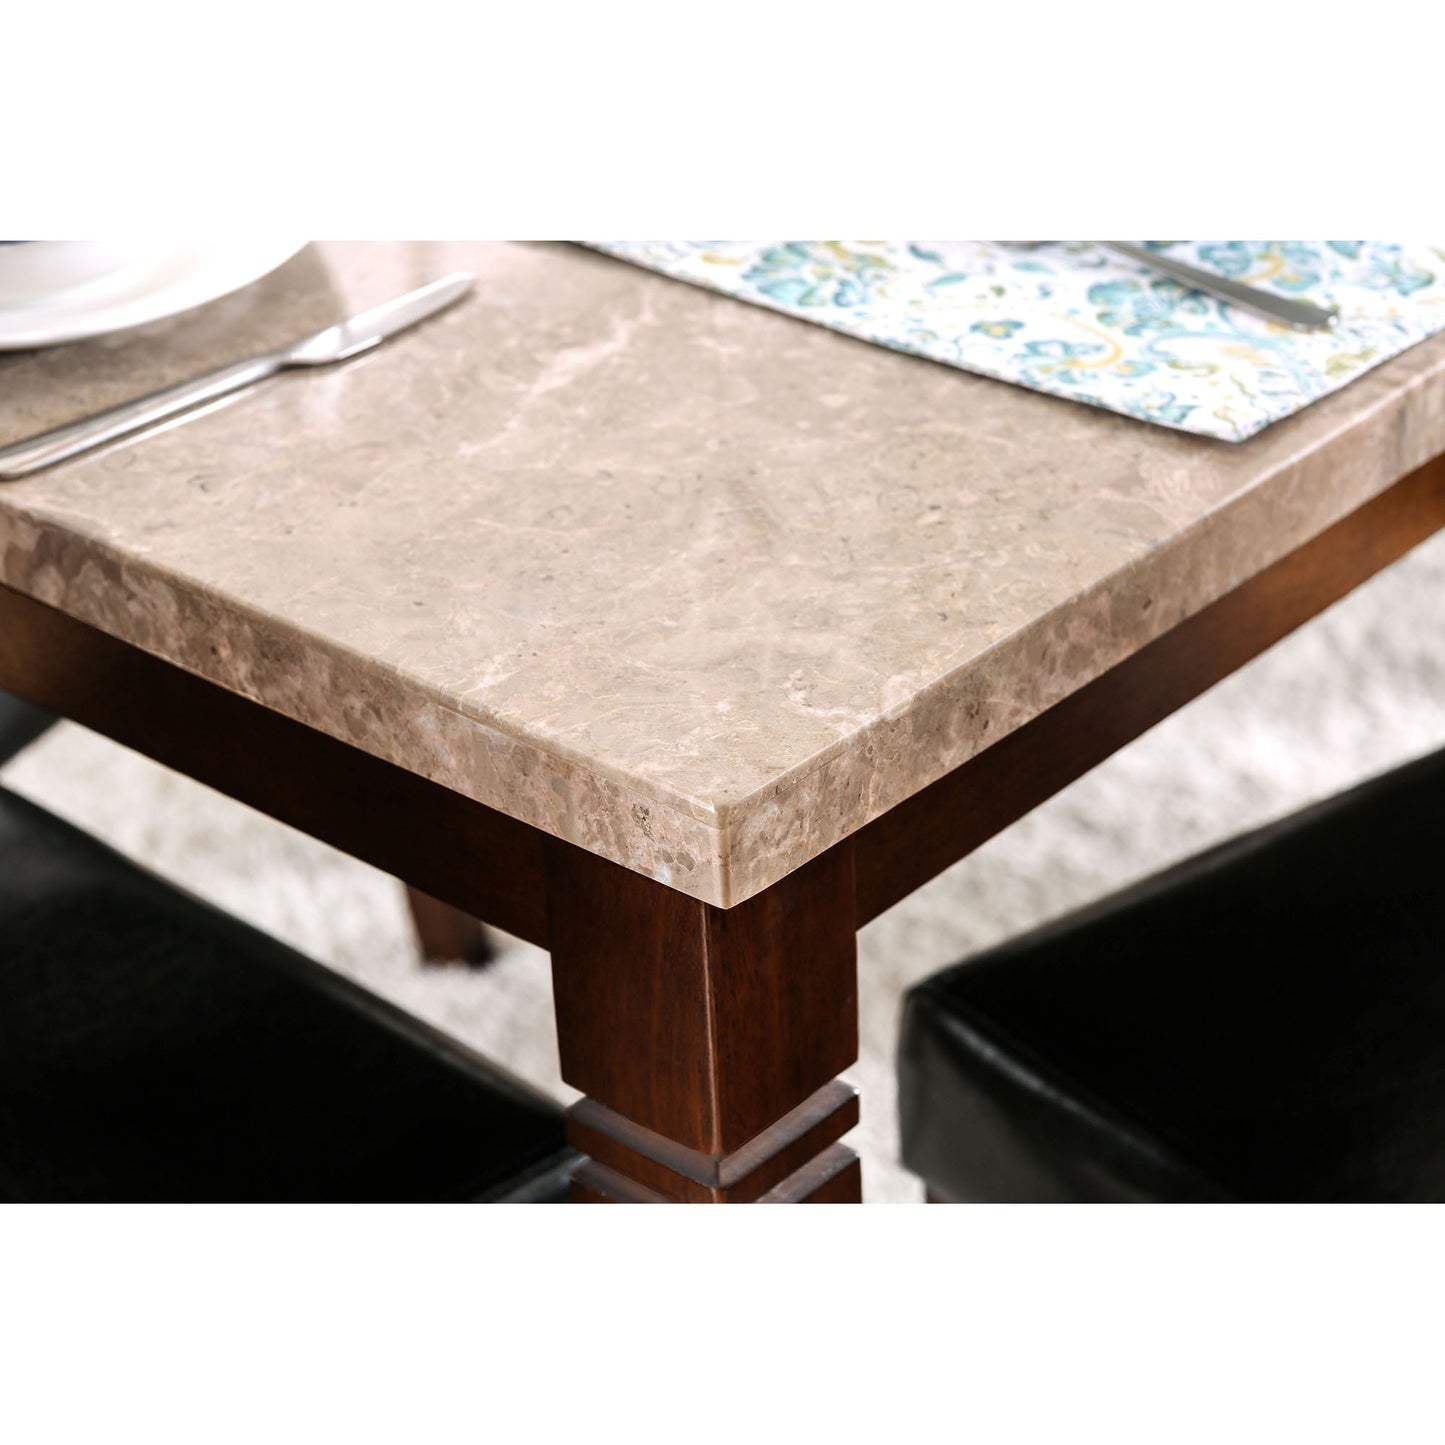 Marstone - Dining Table